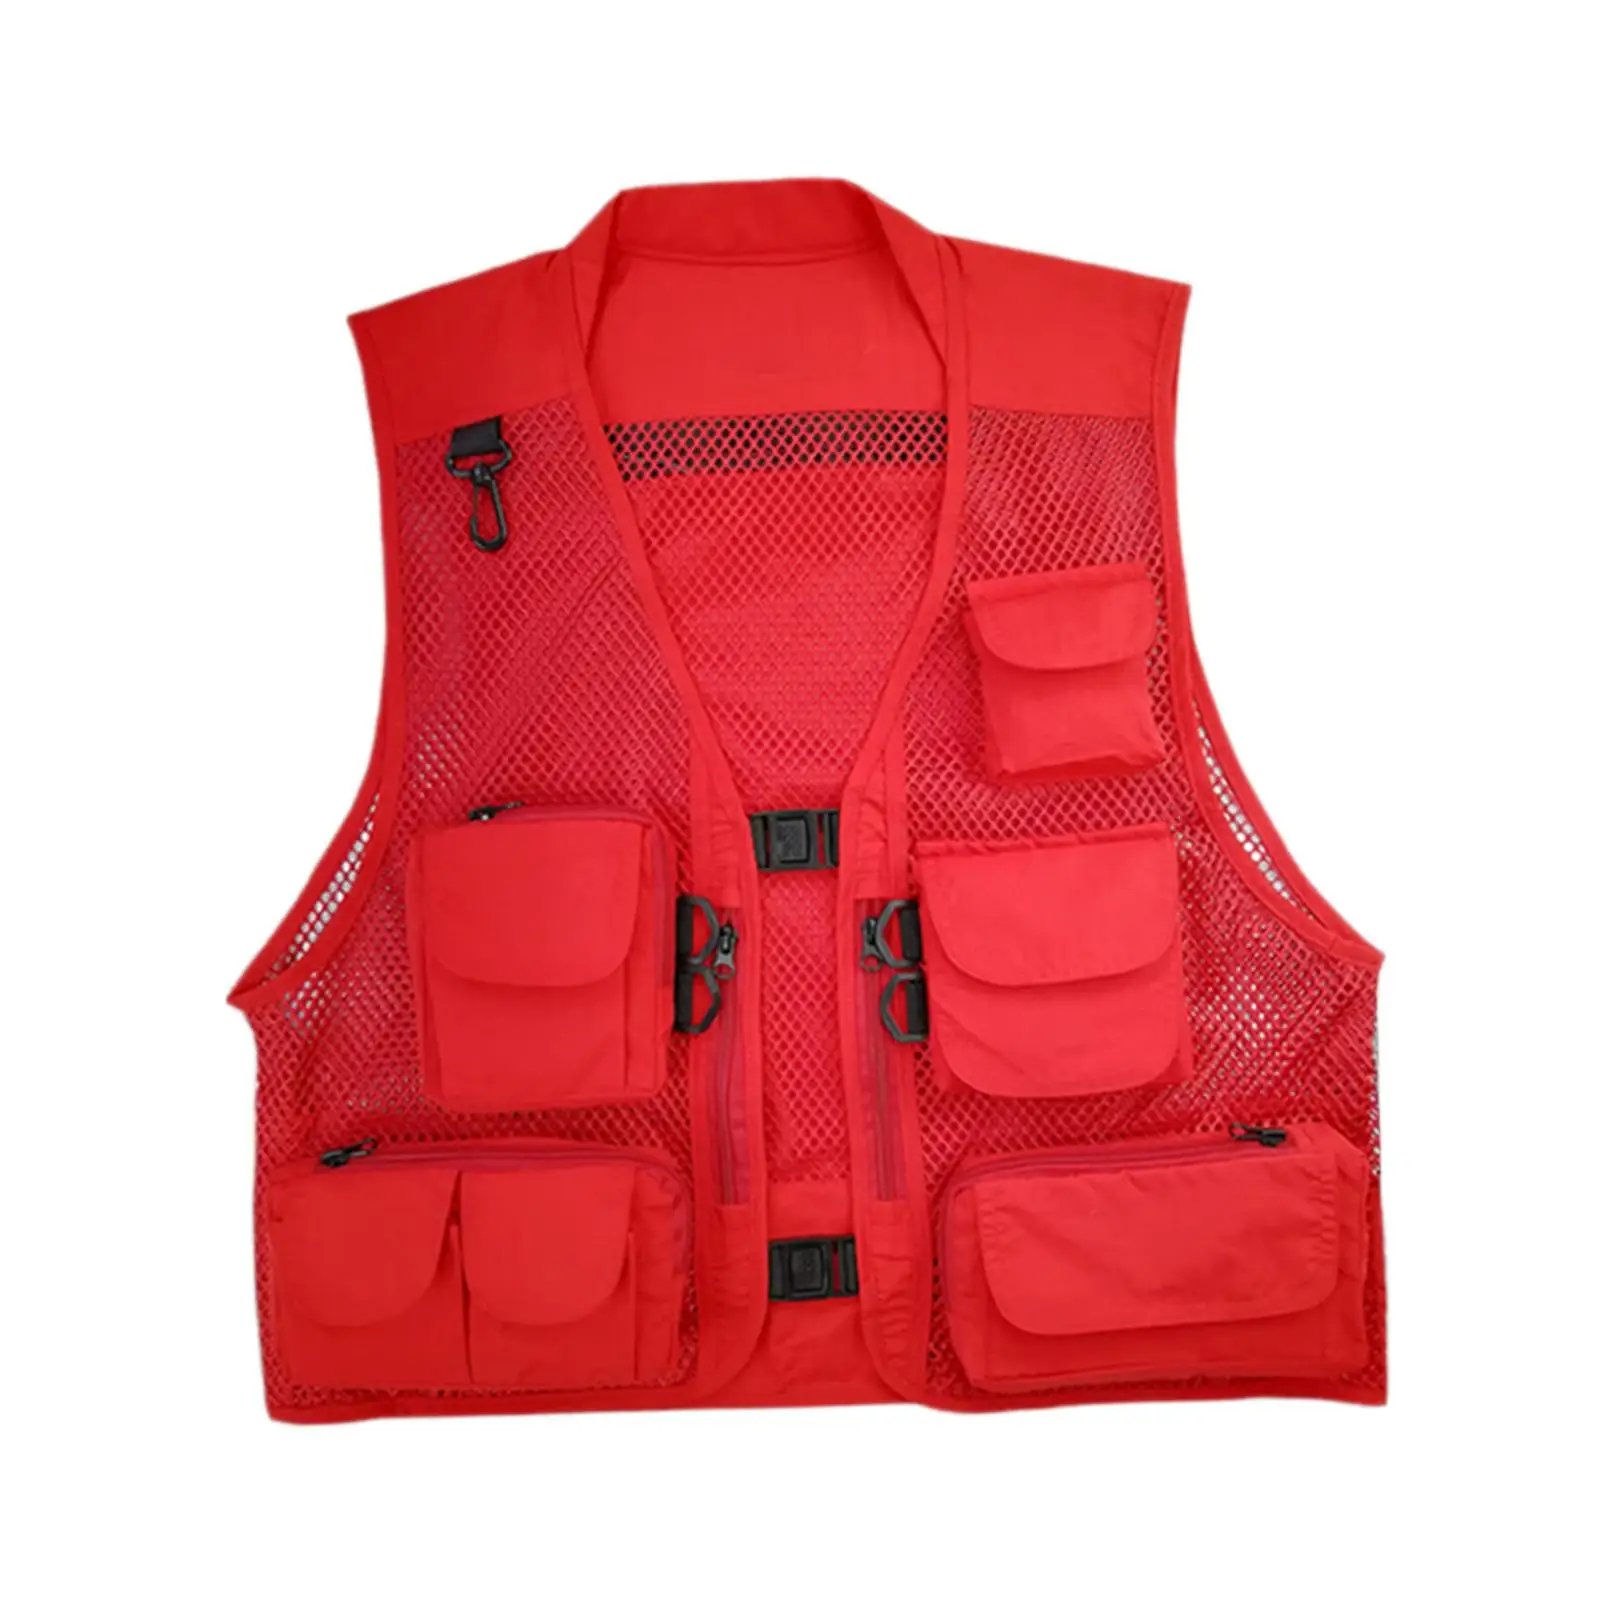 Men Mesh Fishing Photography Vest Multiple Pockets Red Professional Buckle Fastening Quick Drying Polyester Fabric Comfortable